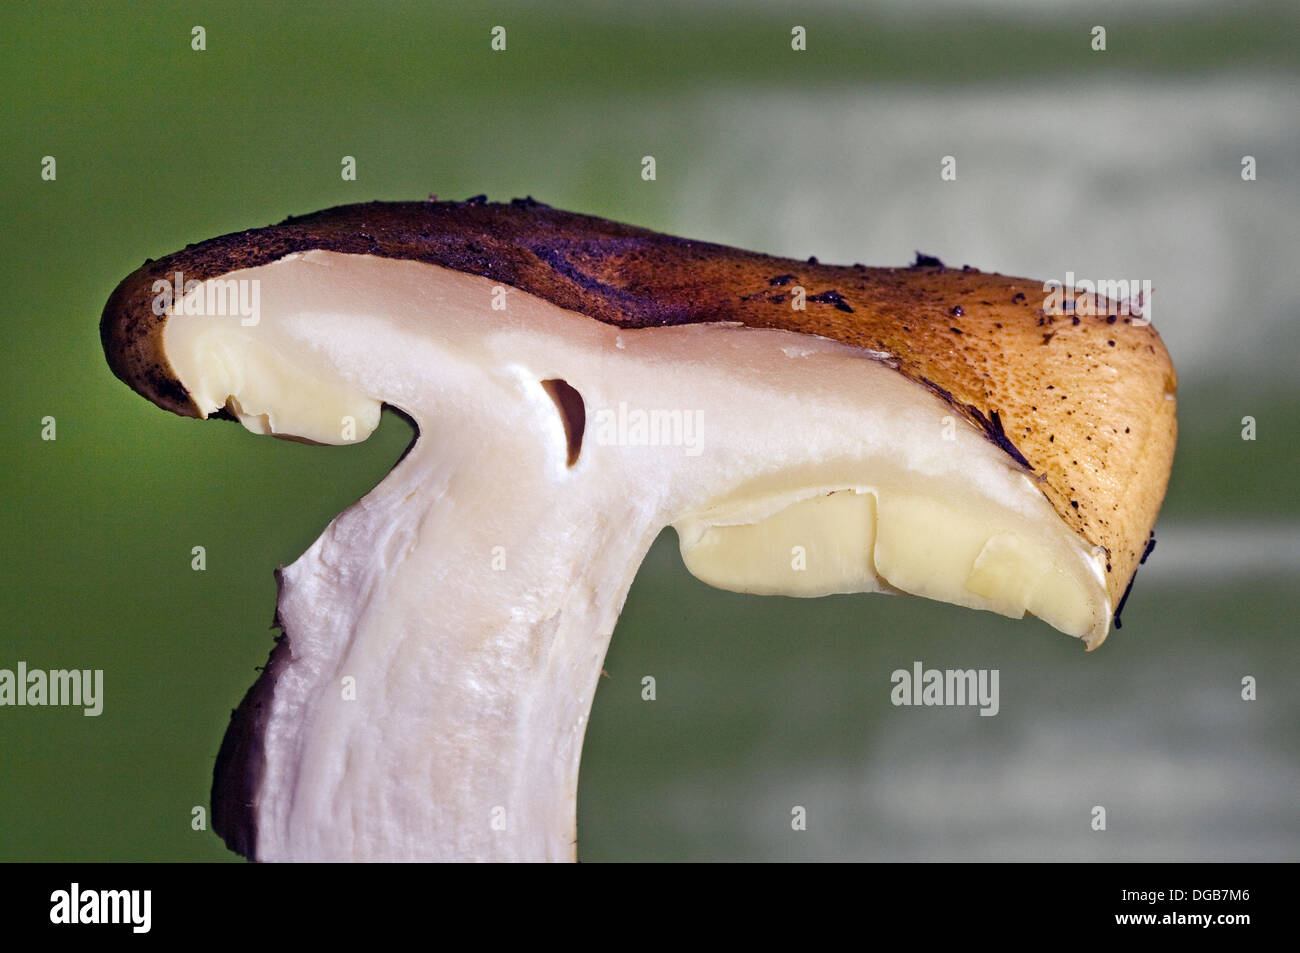 A wild mushroom with free gills, gills that never touch the stem Stock Photo